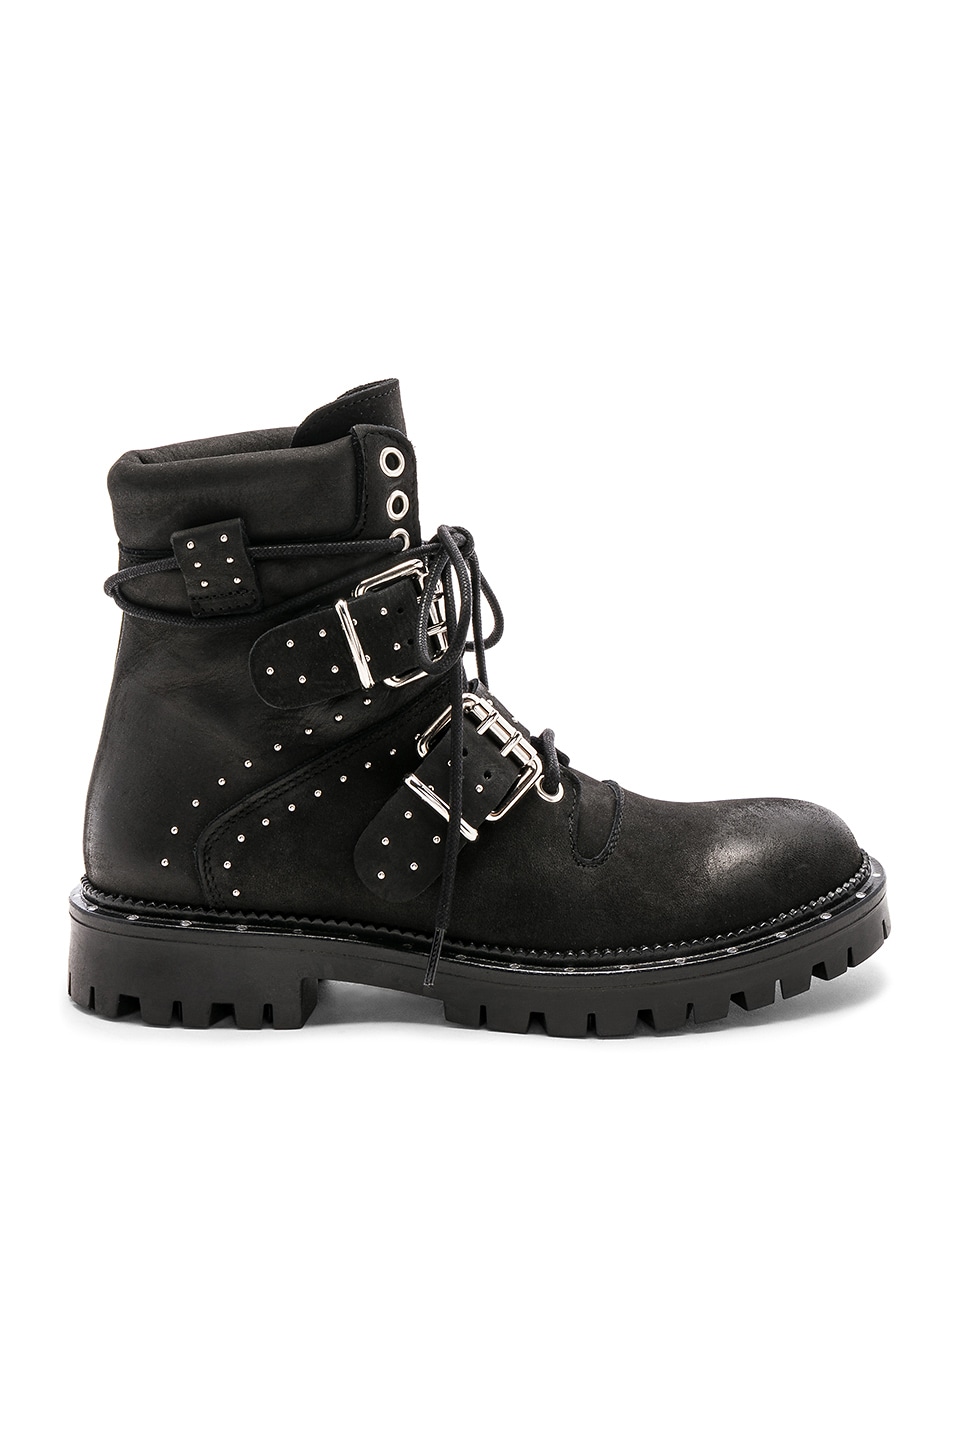 Free People Mountain Brook Hiker Boot in Black | REVOLVE